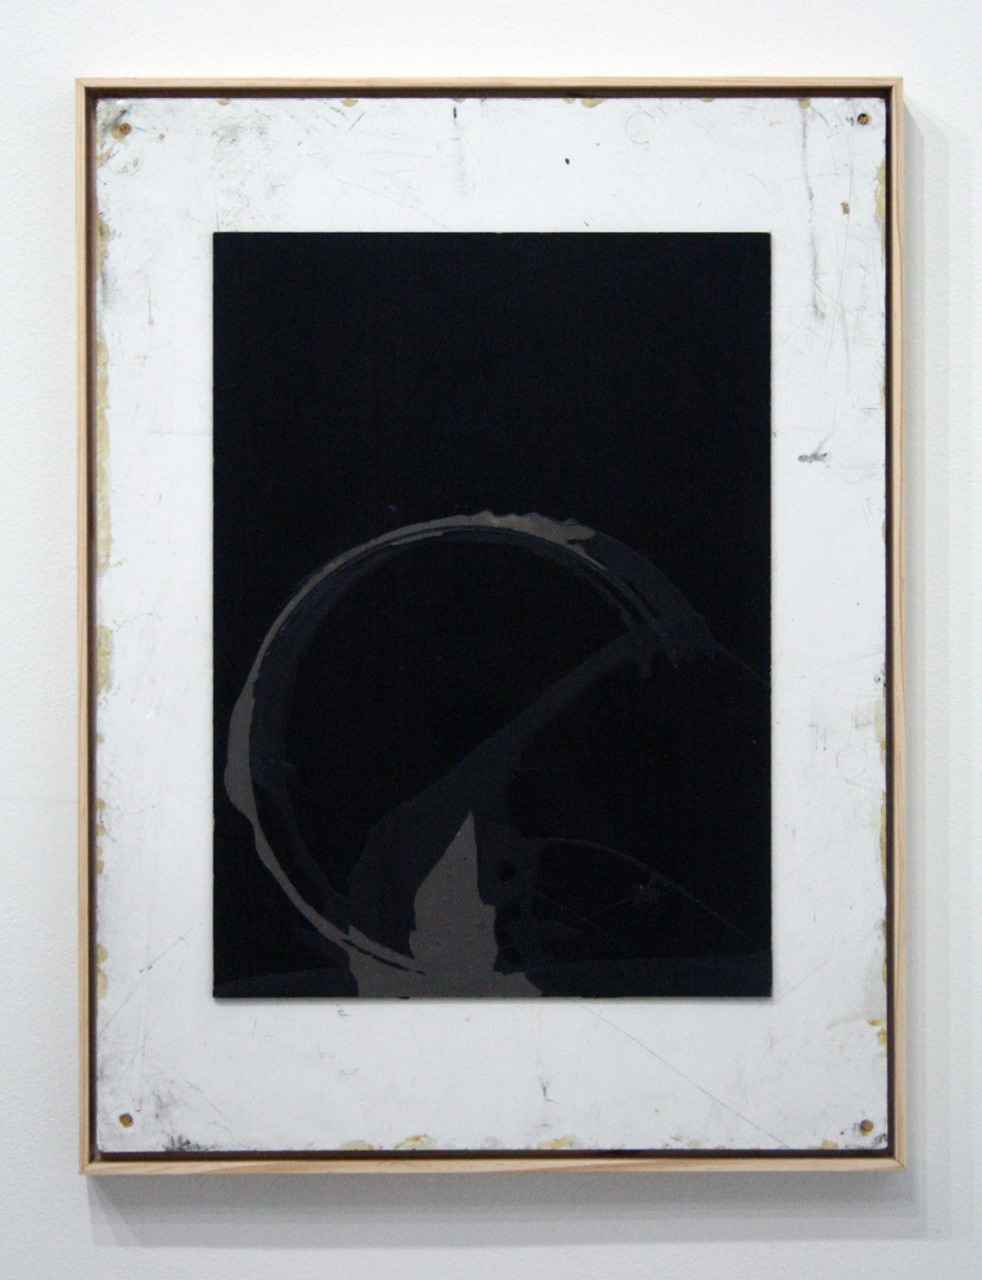 Seth AdelsbergerUntitled (Void) / 2010 / found panel on reversed real estate sign / 25 x 19{quote}